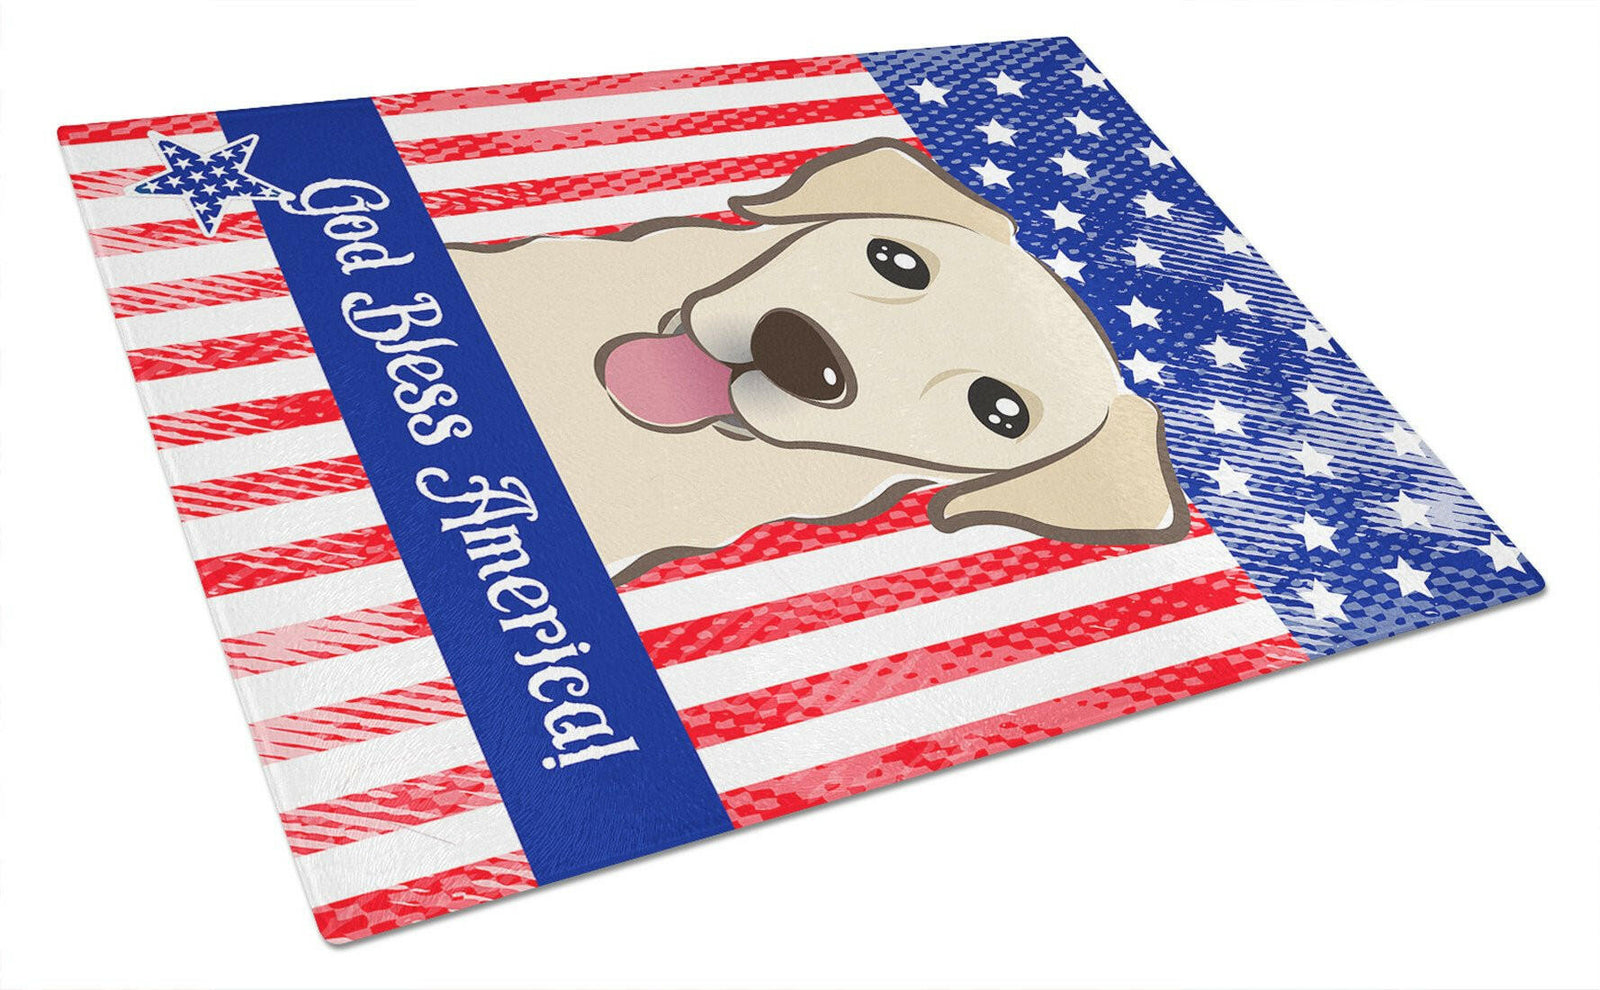 God Bless American Flag with Golden Retriever Glass Cutting Board Large BB2182LCB by Caroline's Treasures